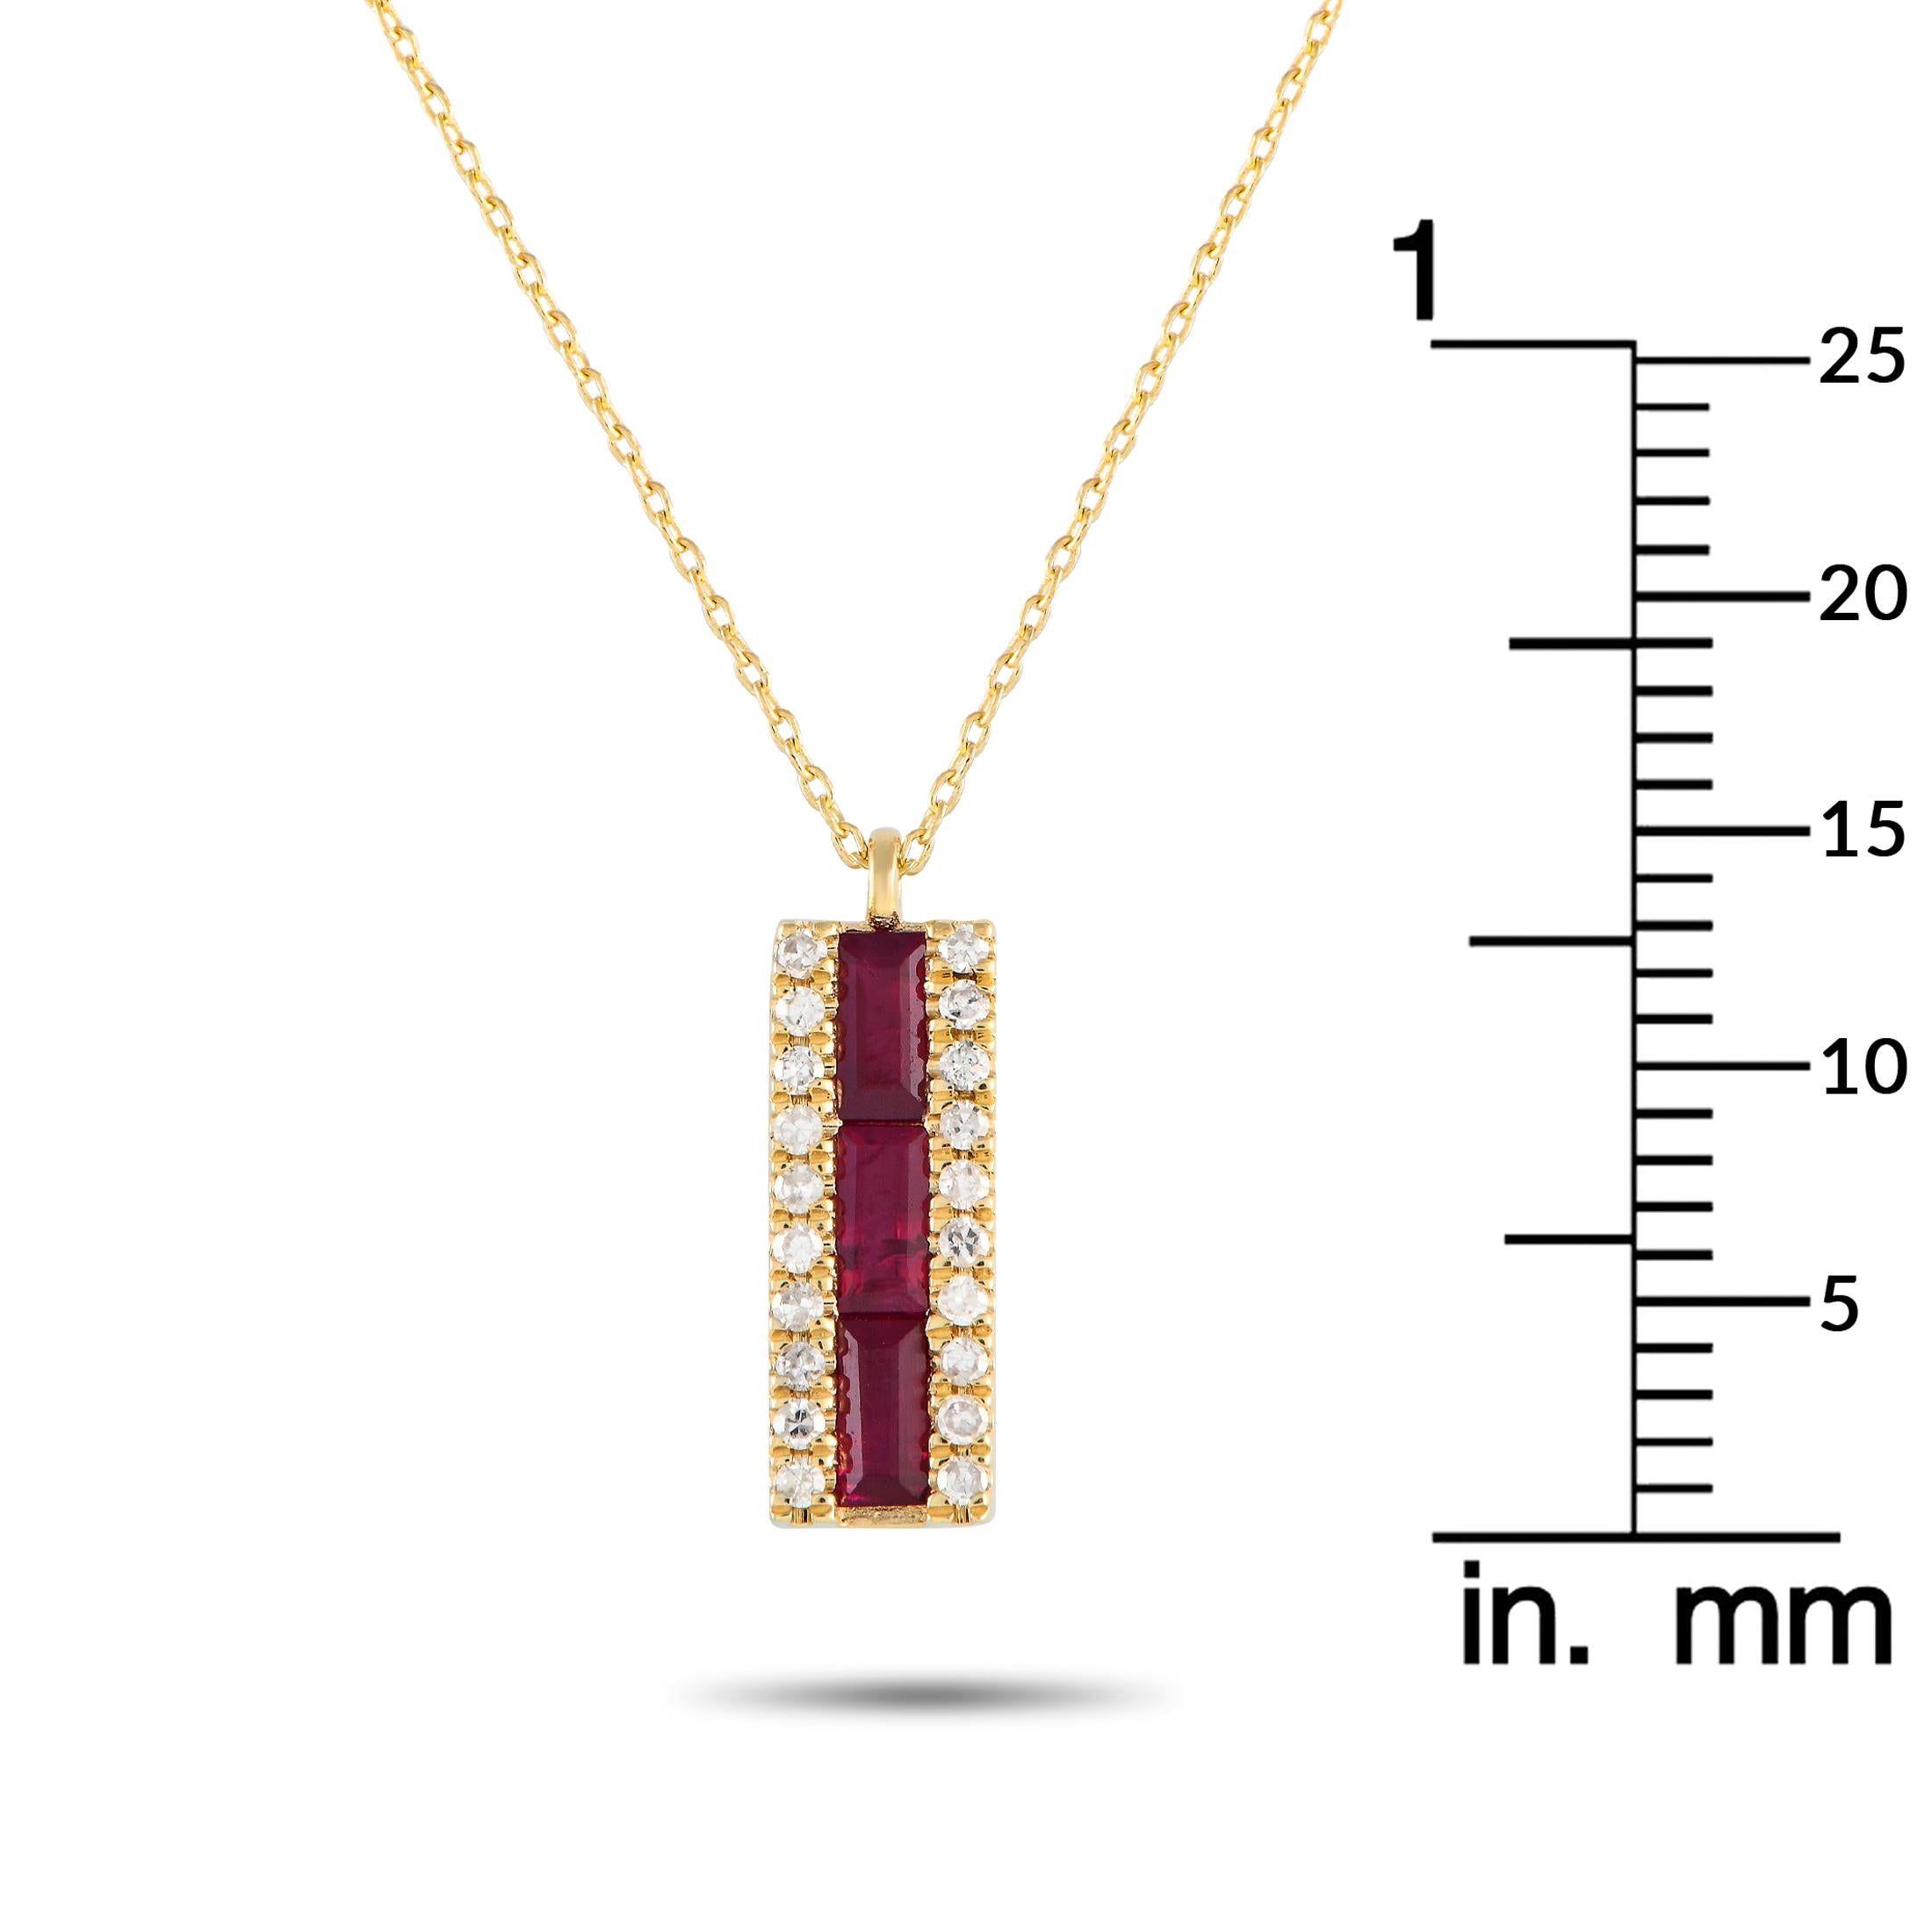 LB Exclusive 14K Yellow Gold 0.10ct Diamond & Ruby Pendant Necklace PD4-16063YRU In New Condition For Sale In Southampton, PA